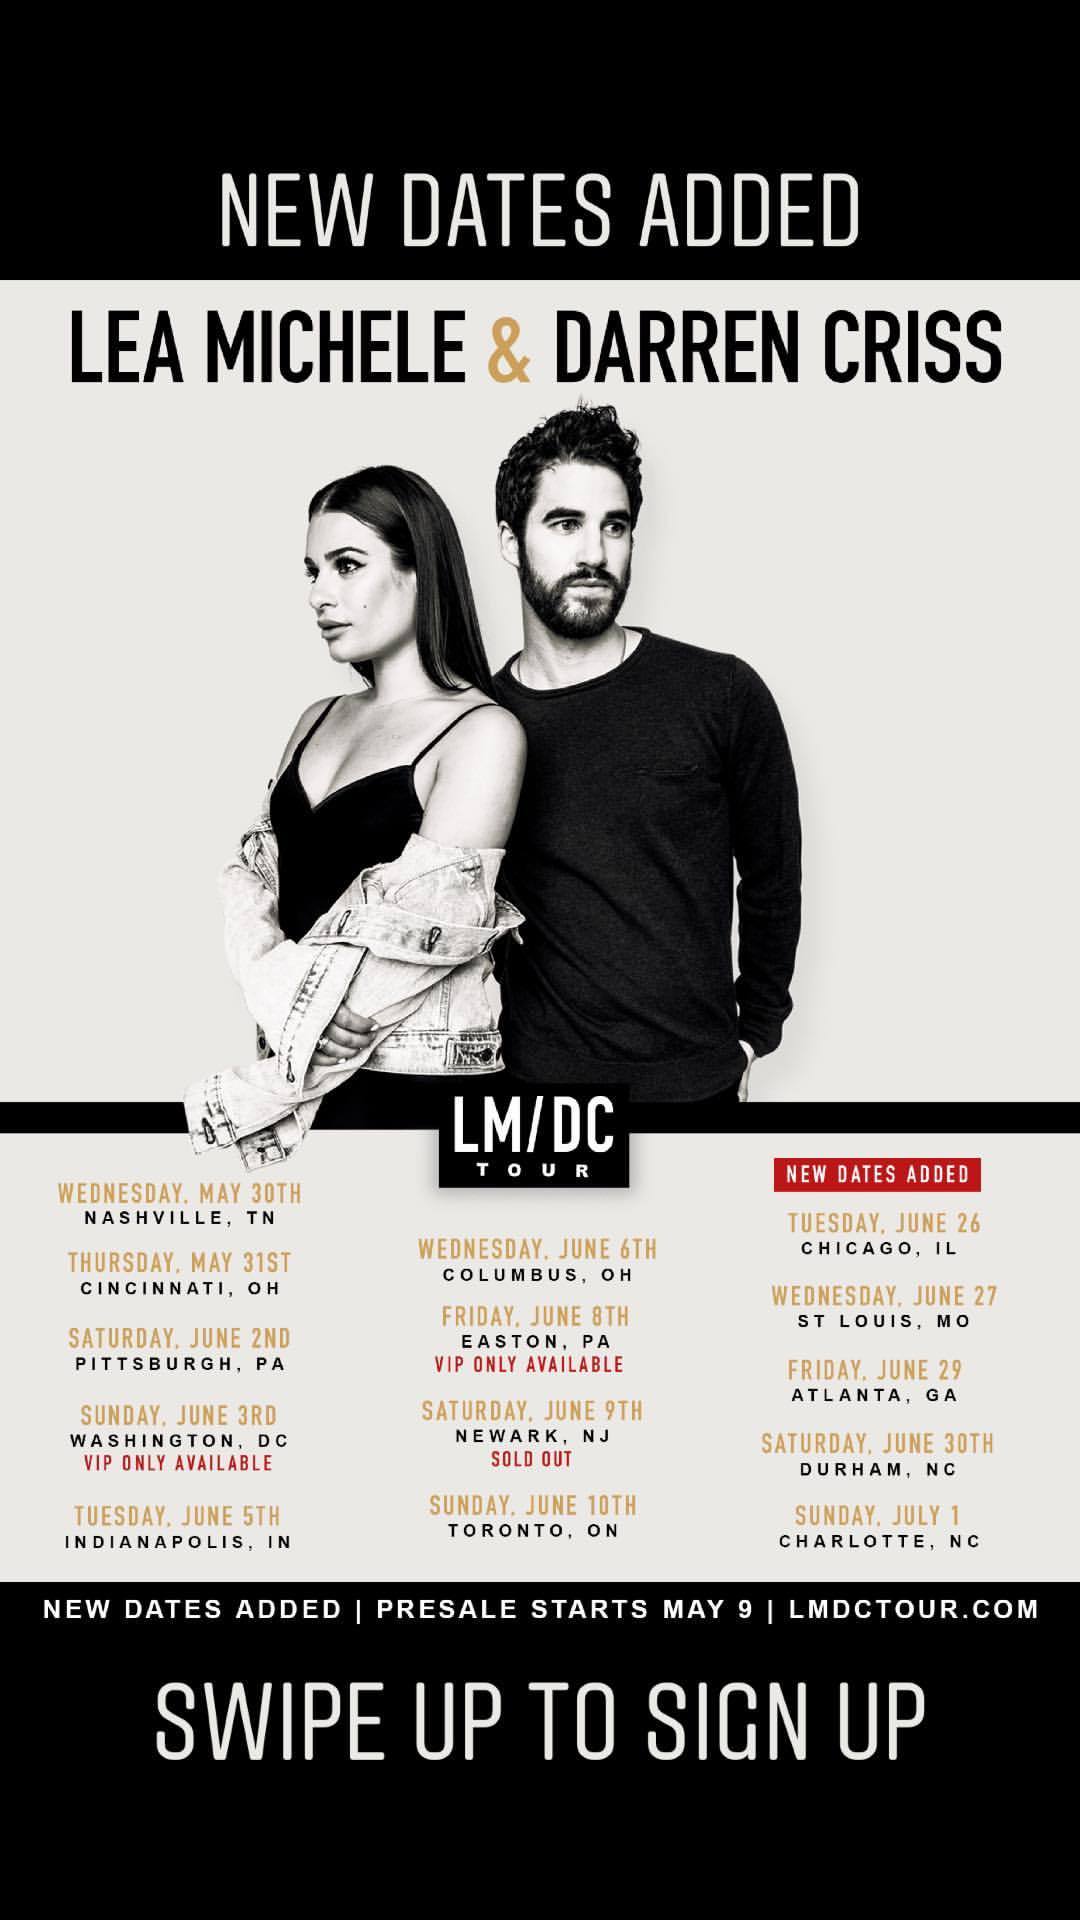 LMDCtour - Darren's Concerts and Other Musical Performancs for 2018 - Page 2 Tumblr_p8df3uvmTc1wpi2k2o1_1280